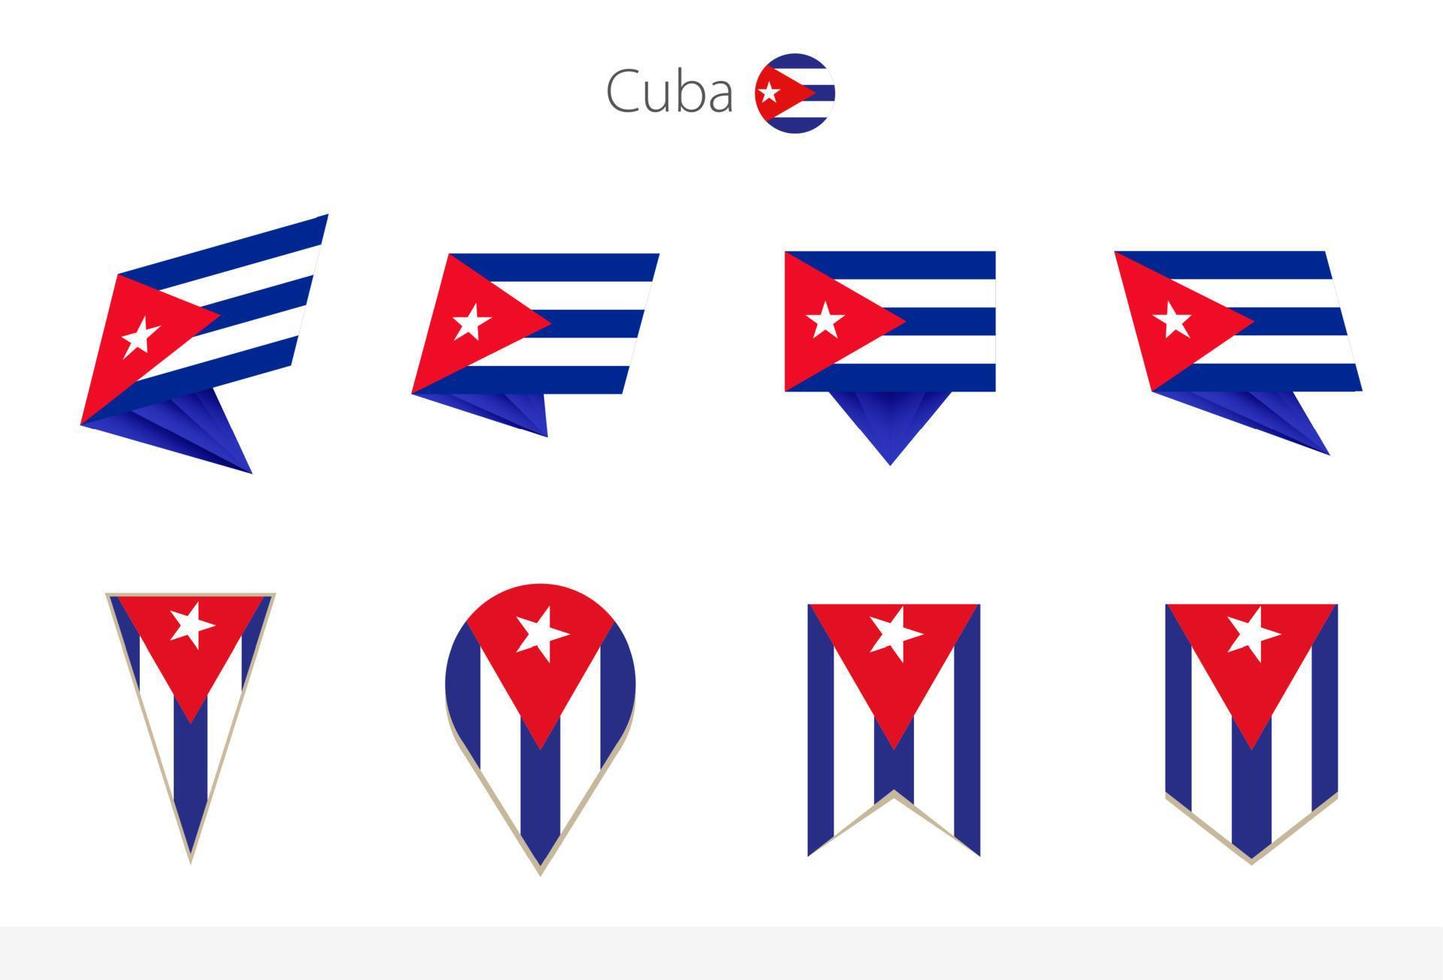 Cuba national flag collection, eight versions of Cuba vector flags.